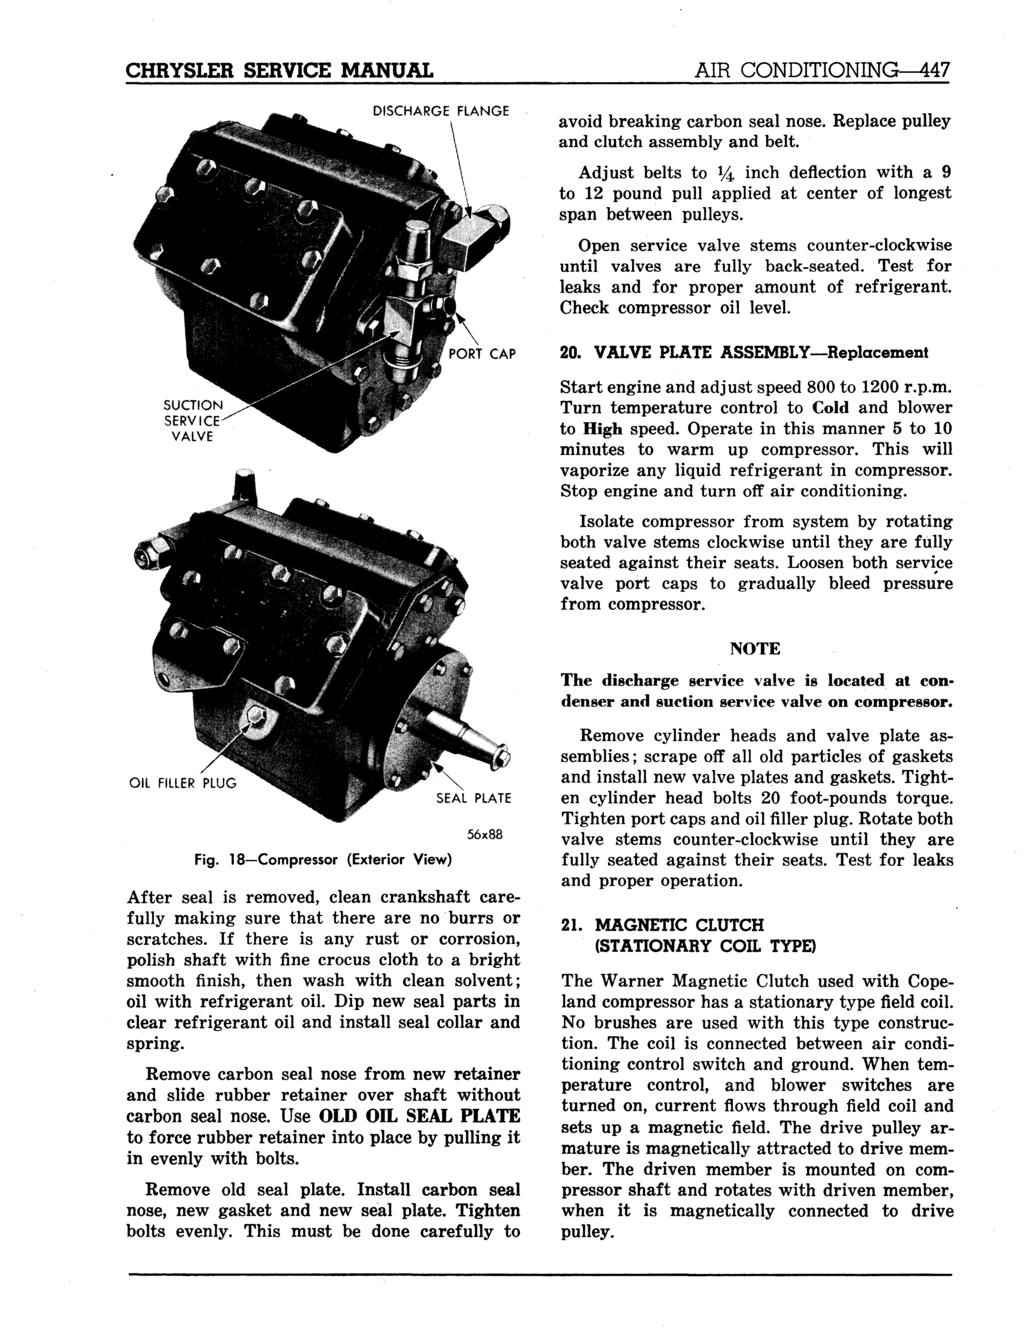 CHRYSLER SERVICE MANUAL AIR CONDITIONING 447 DISCHARGE FLANGE \ avoid breaking carbon seal nose. Replace pulley and clutch assembly and belt.